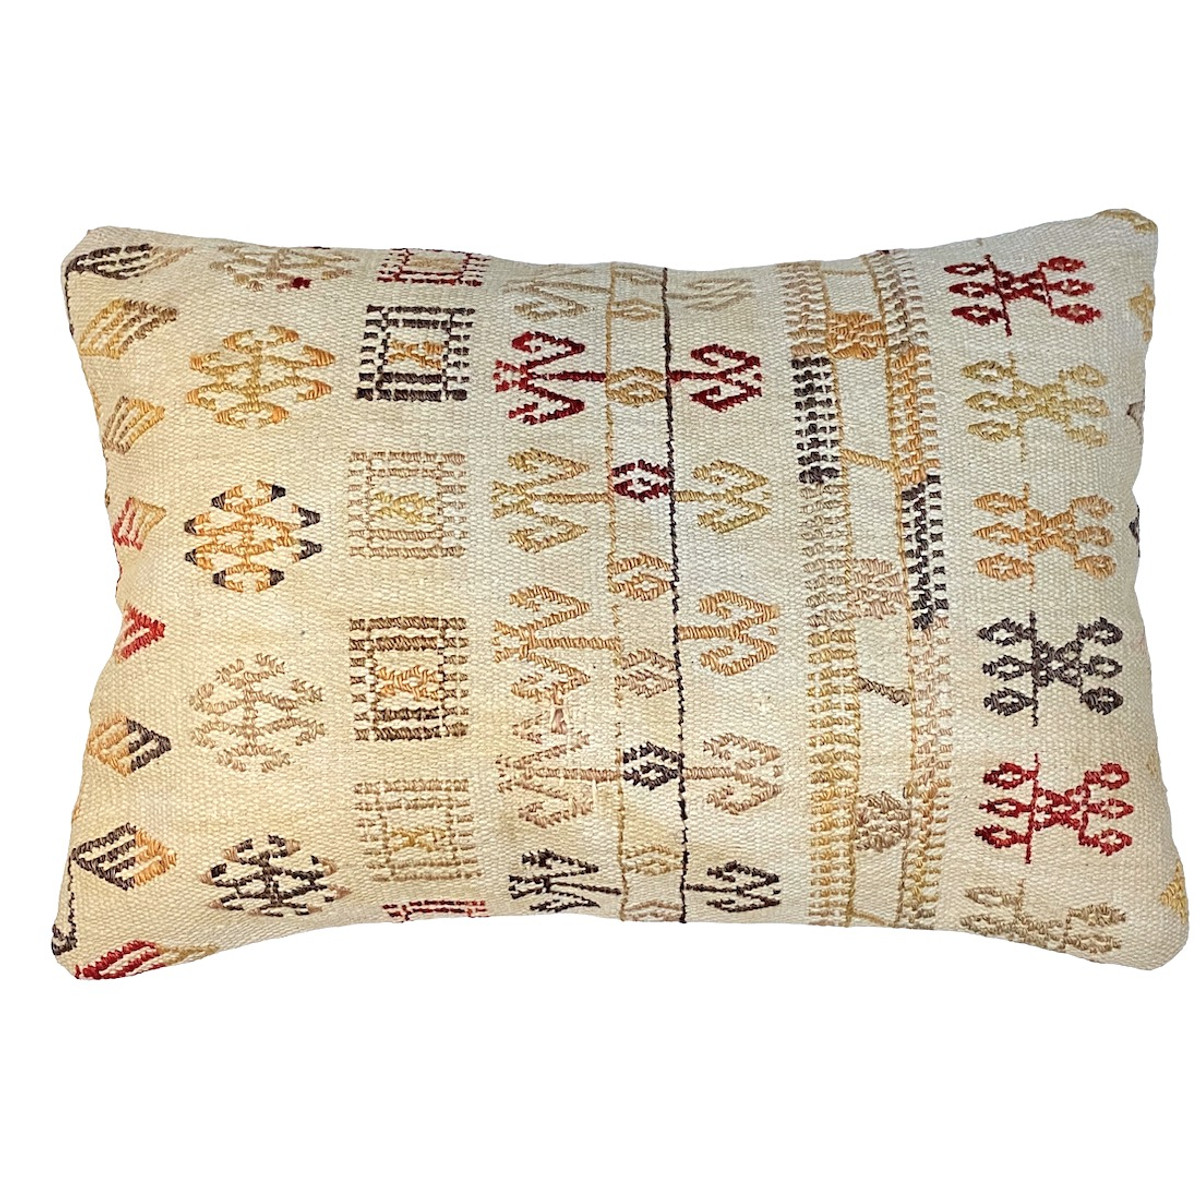 Vintage Wool Kilim Rectangular Pillow Turkey 153" x 19" The pillow is shades of beige with designs in brick red, taupe, pale papaya, wheat and grey.Pale grey green colored cotton back with zipper.